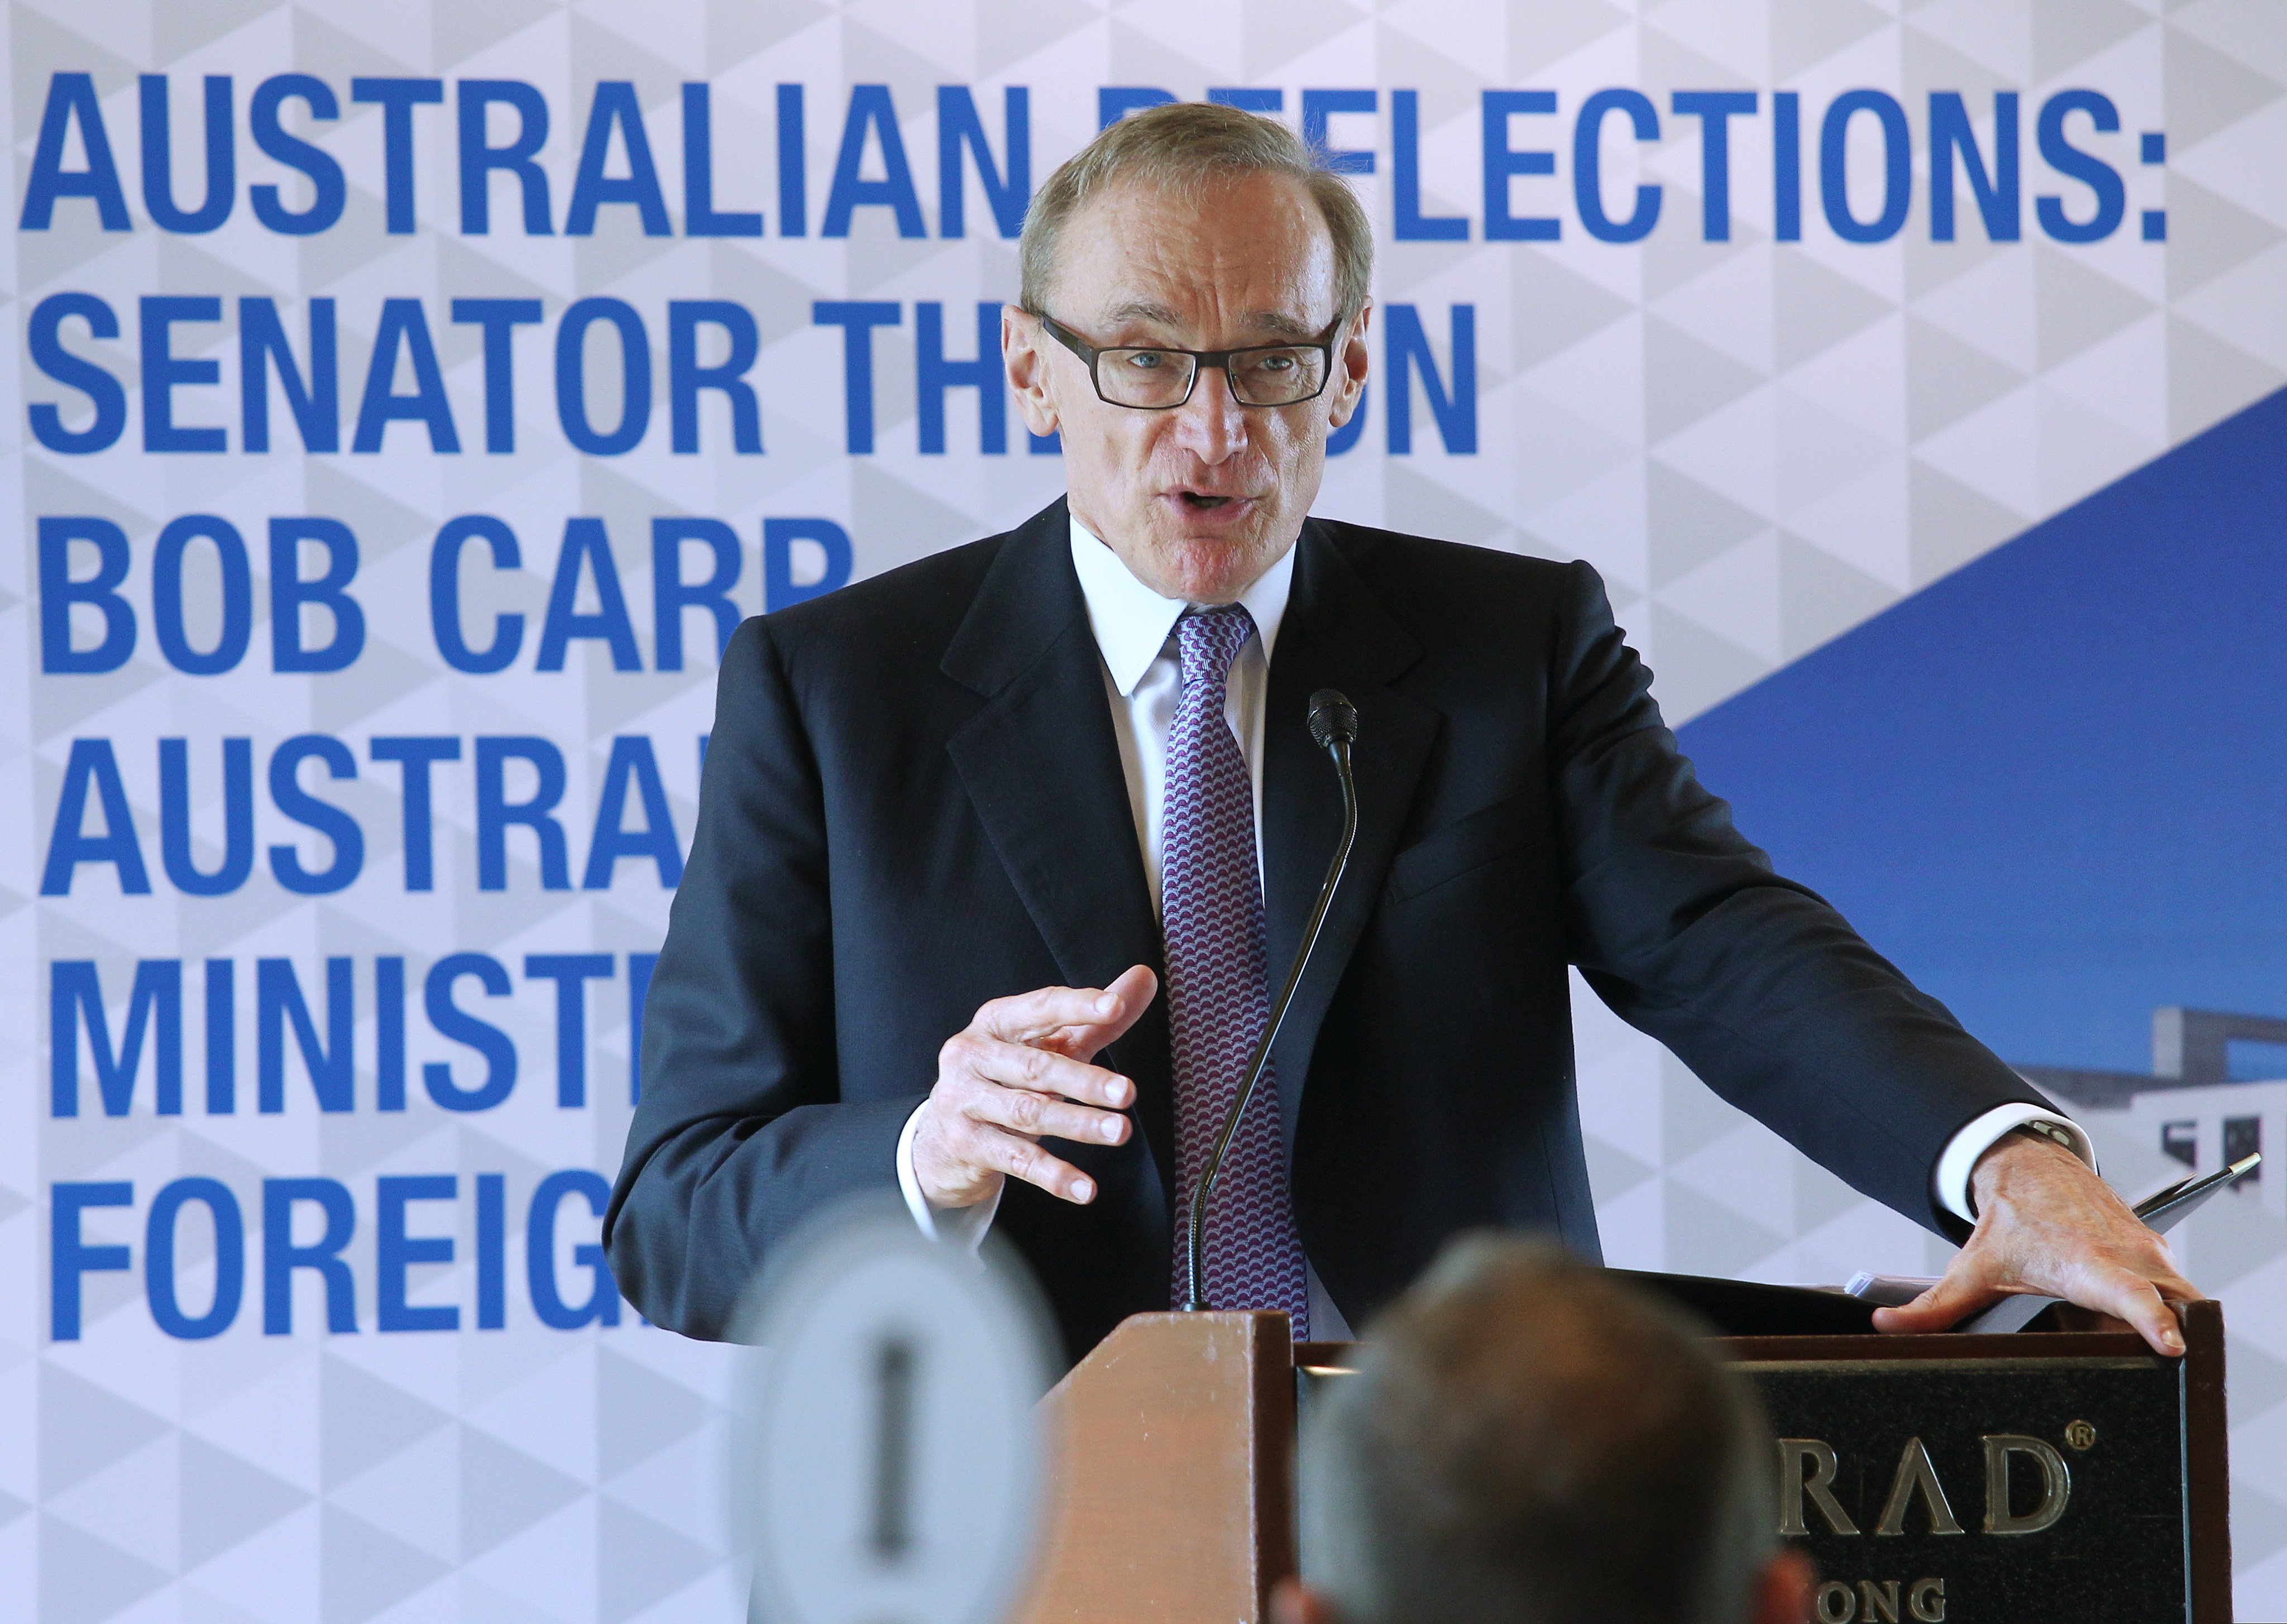 Former Australian Minister for Foreign Affairs Bob Carr is suing New Zealand’s foreign minister, Winston Peters, over a comment the minister made about his close ties with China. Photo: SCMP